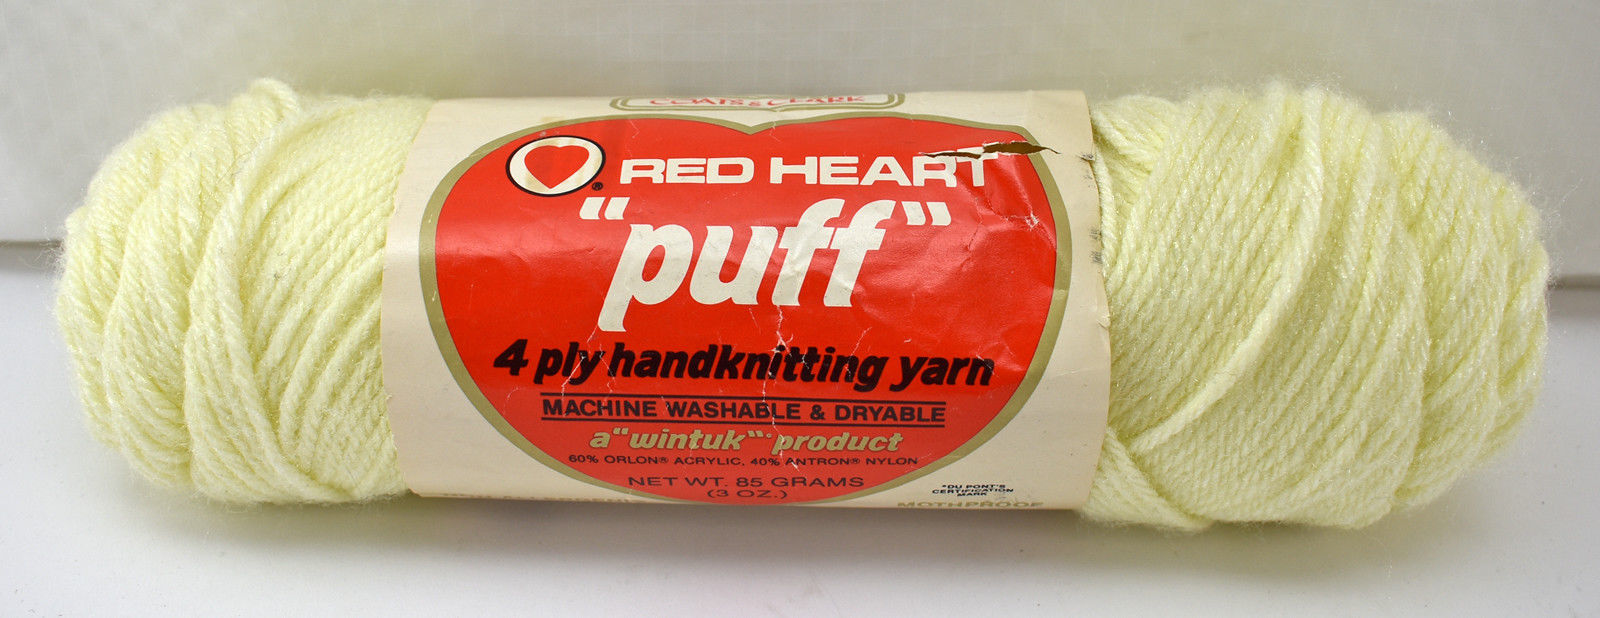 Primary image for Vintage Red Heart Puff Wintuk Orlon Acrylic Yarn - 1 Skein Color Soft Yellow